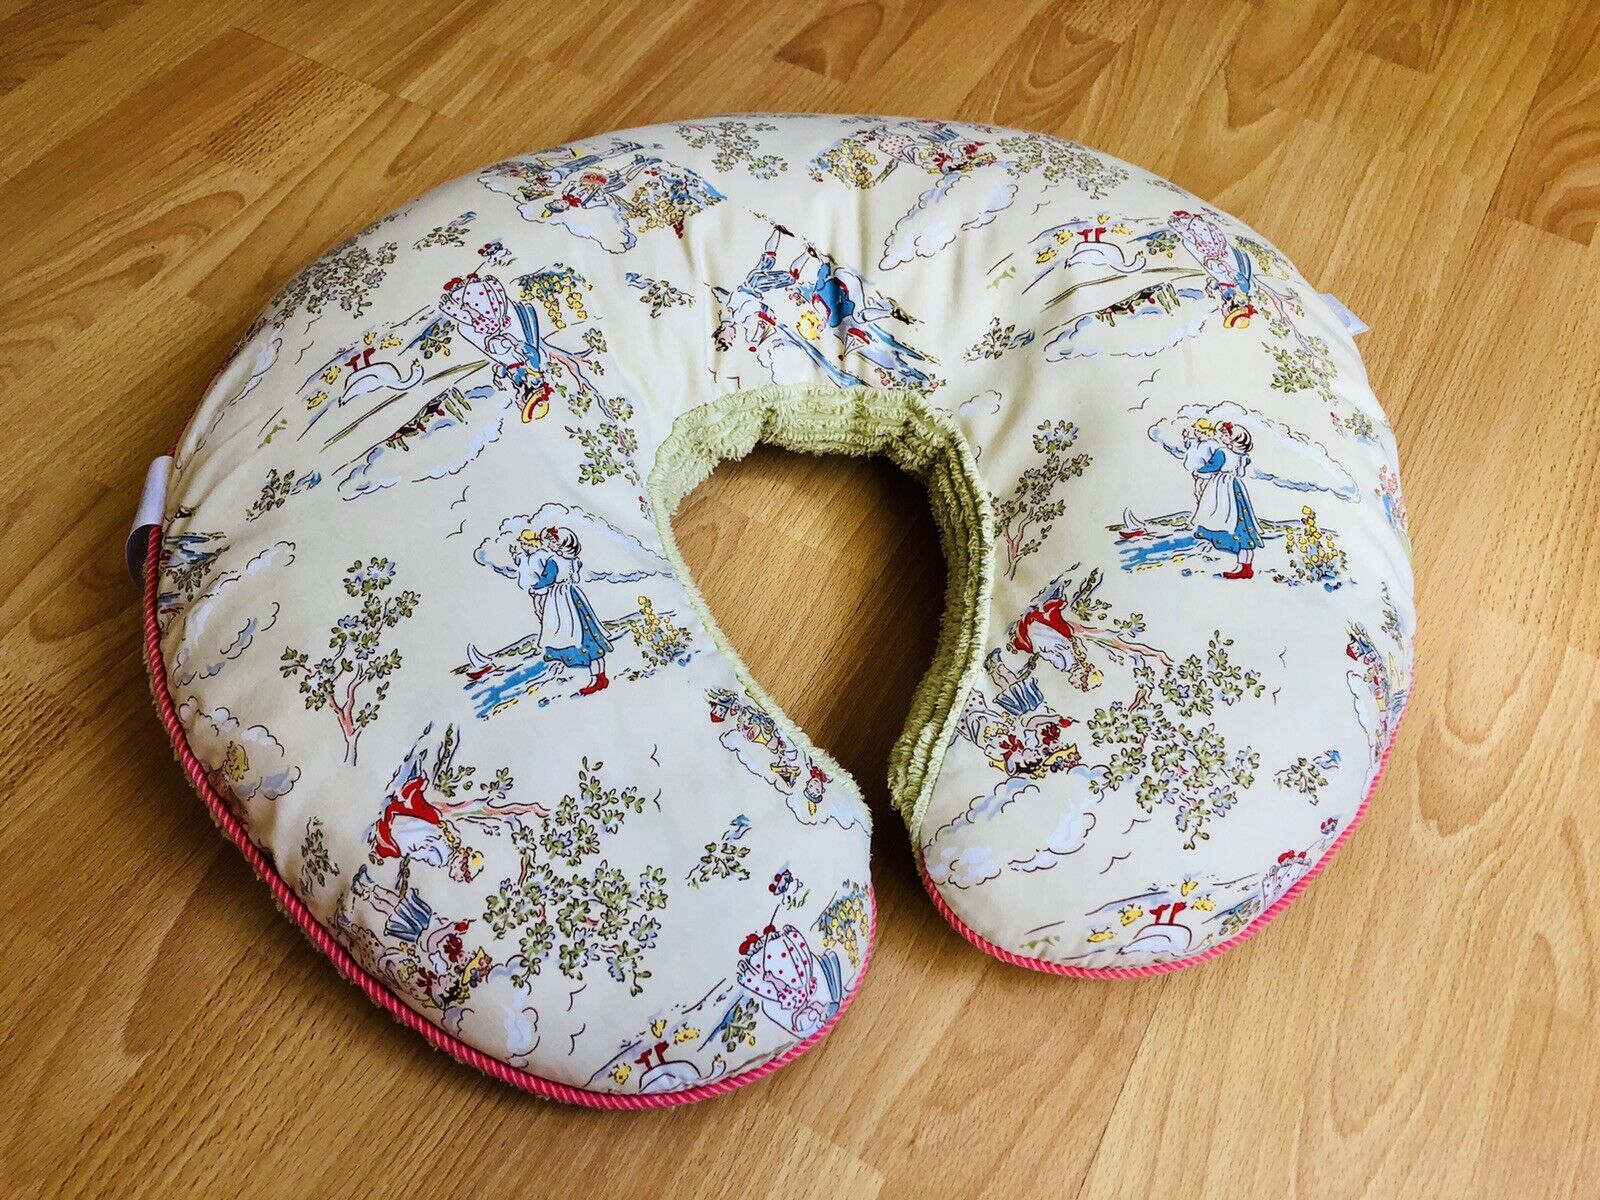 Boppy Original Feeding and Support Pillow Happy Baby Classic Boy